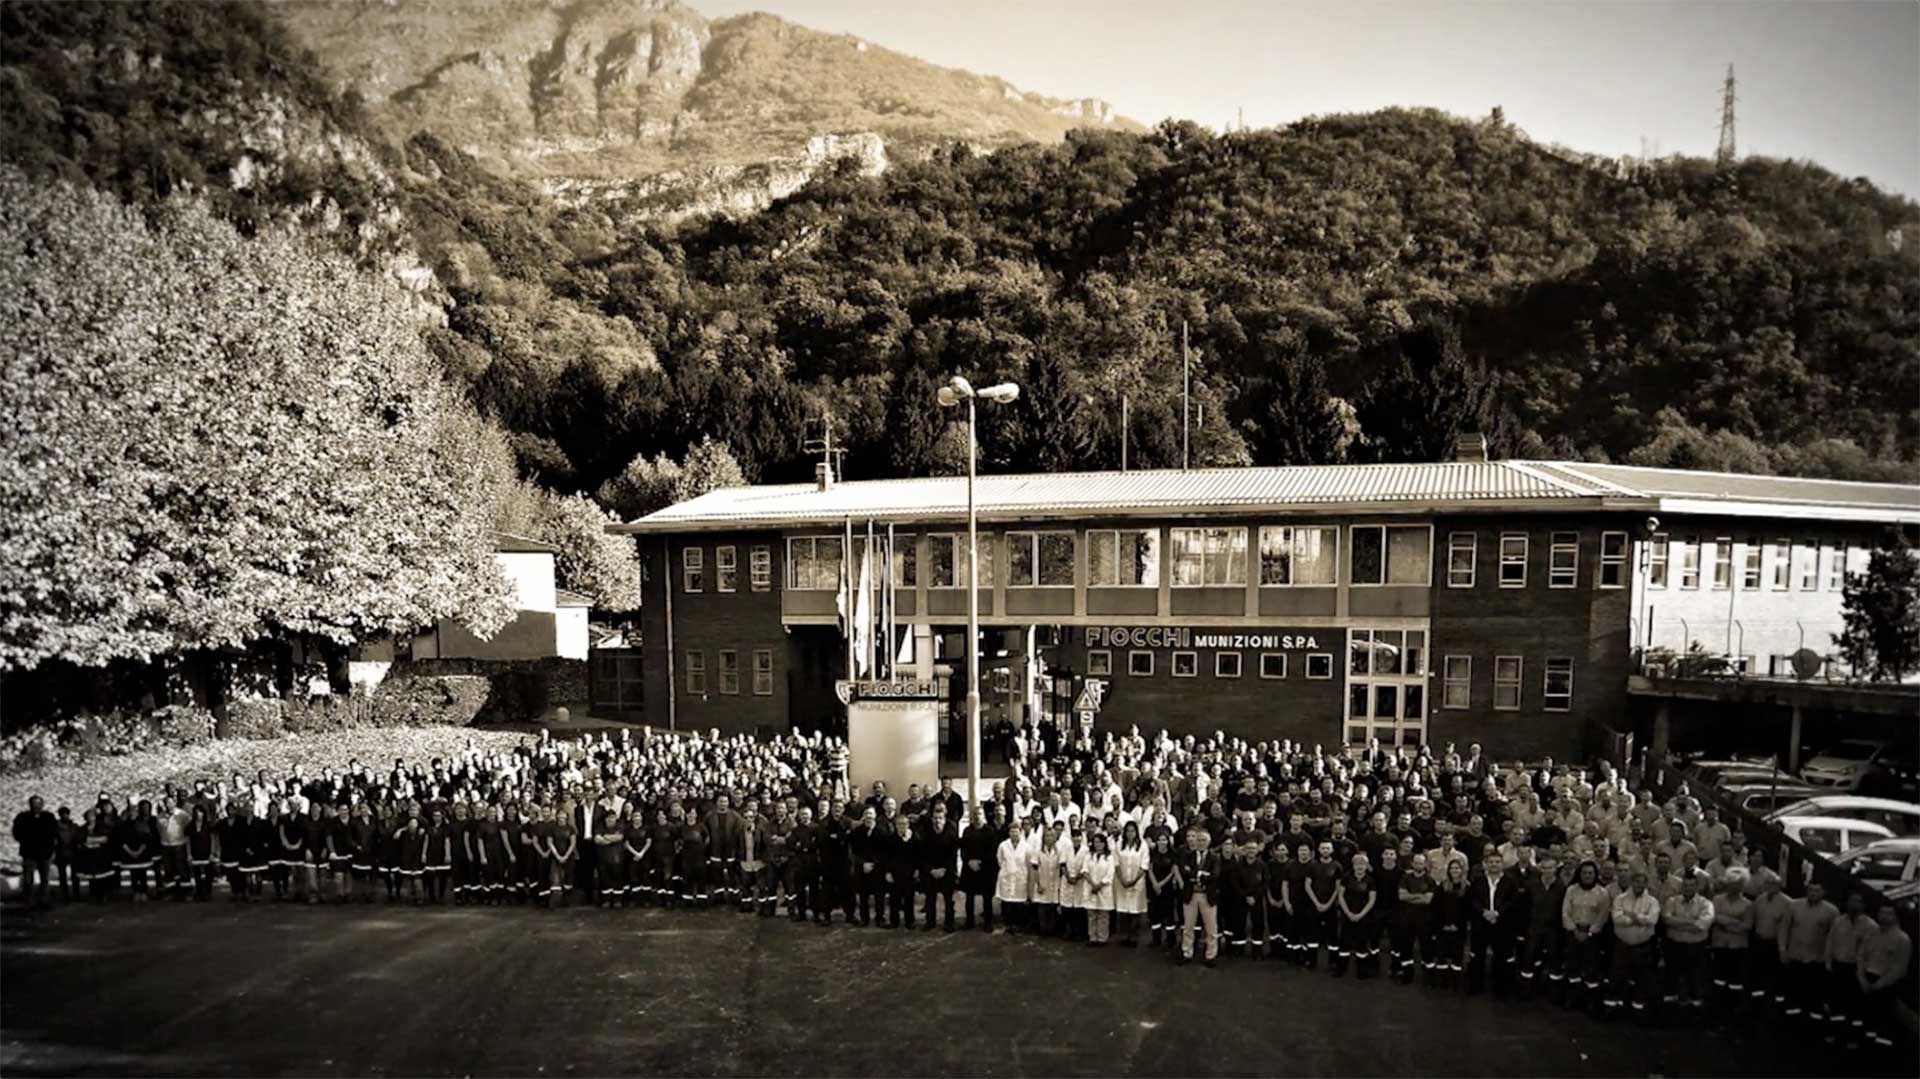 An archival photo of the Fiocchi munitions plant in Italy, with the company staff standing outside the manufacturing building.